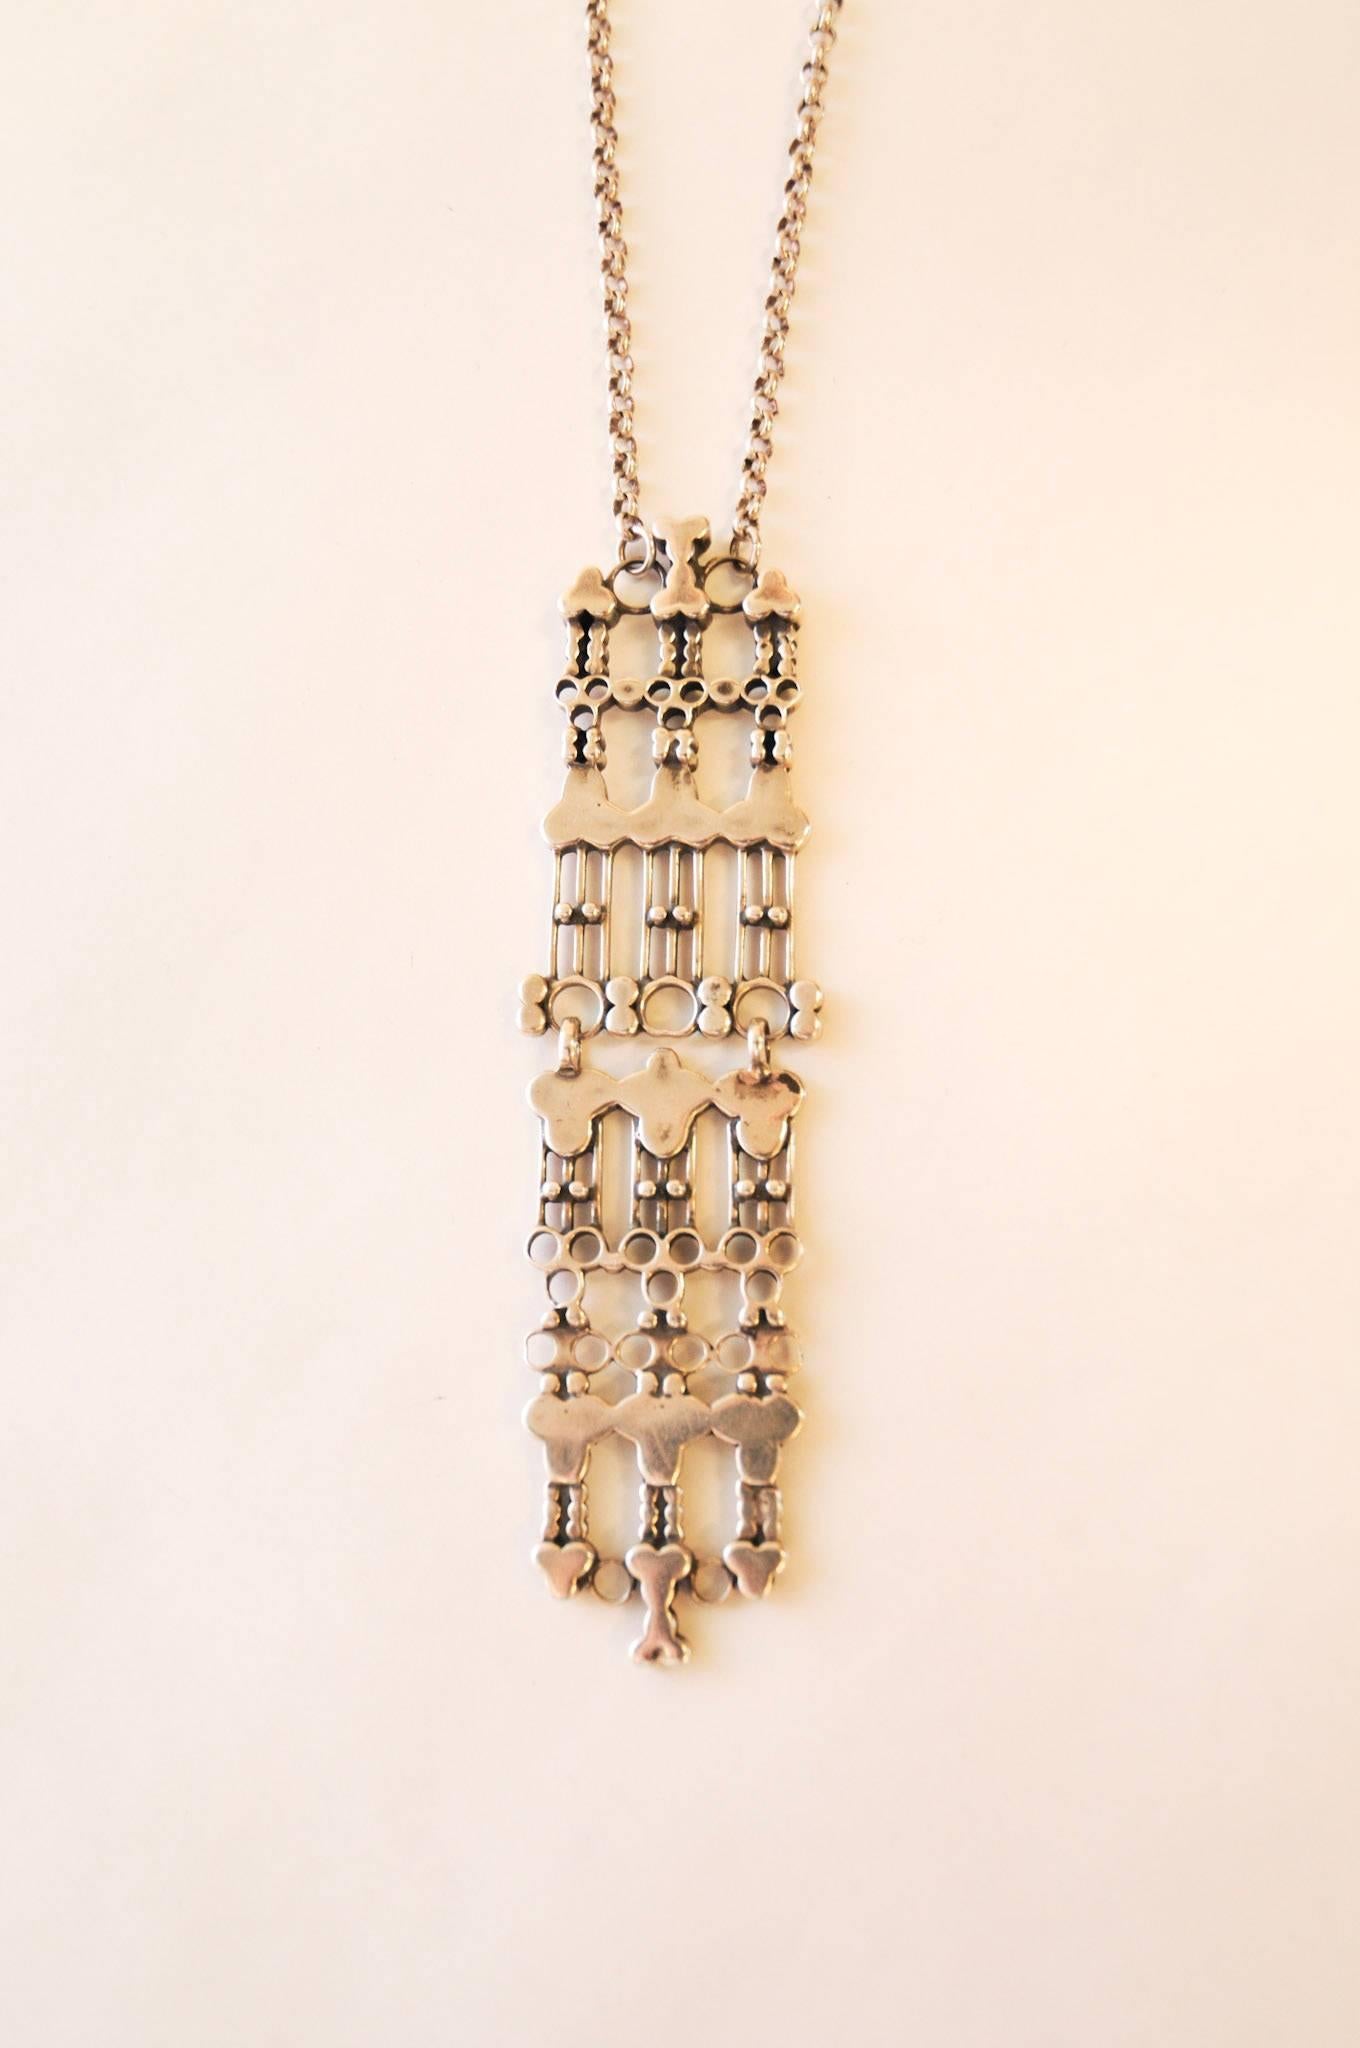 Beautiful Norwegian Silver necklace by Marianne Berg. Produced by David Andersen. This is an excellent example of Scandinavian Midcentury Modern jewelry. 

Uni David-Andersen which was the great grand daughter of the founder of the company, took